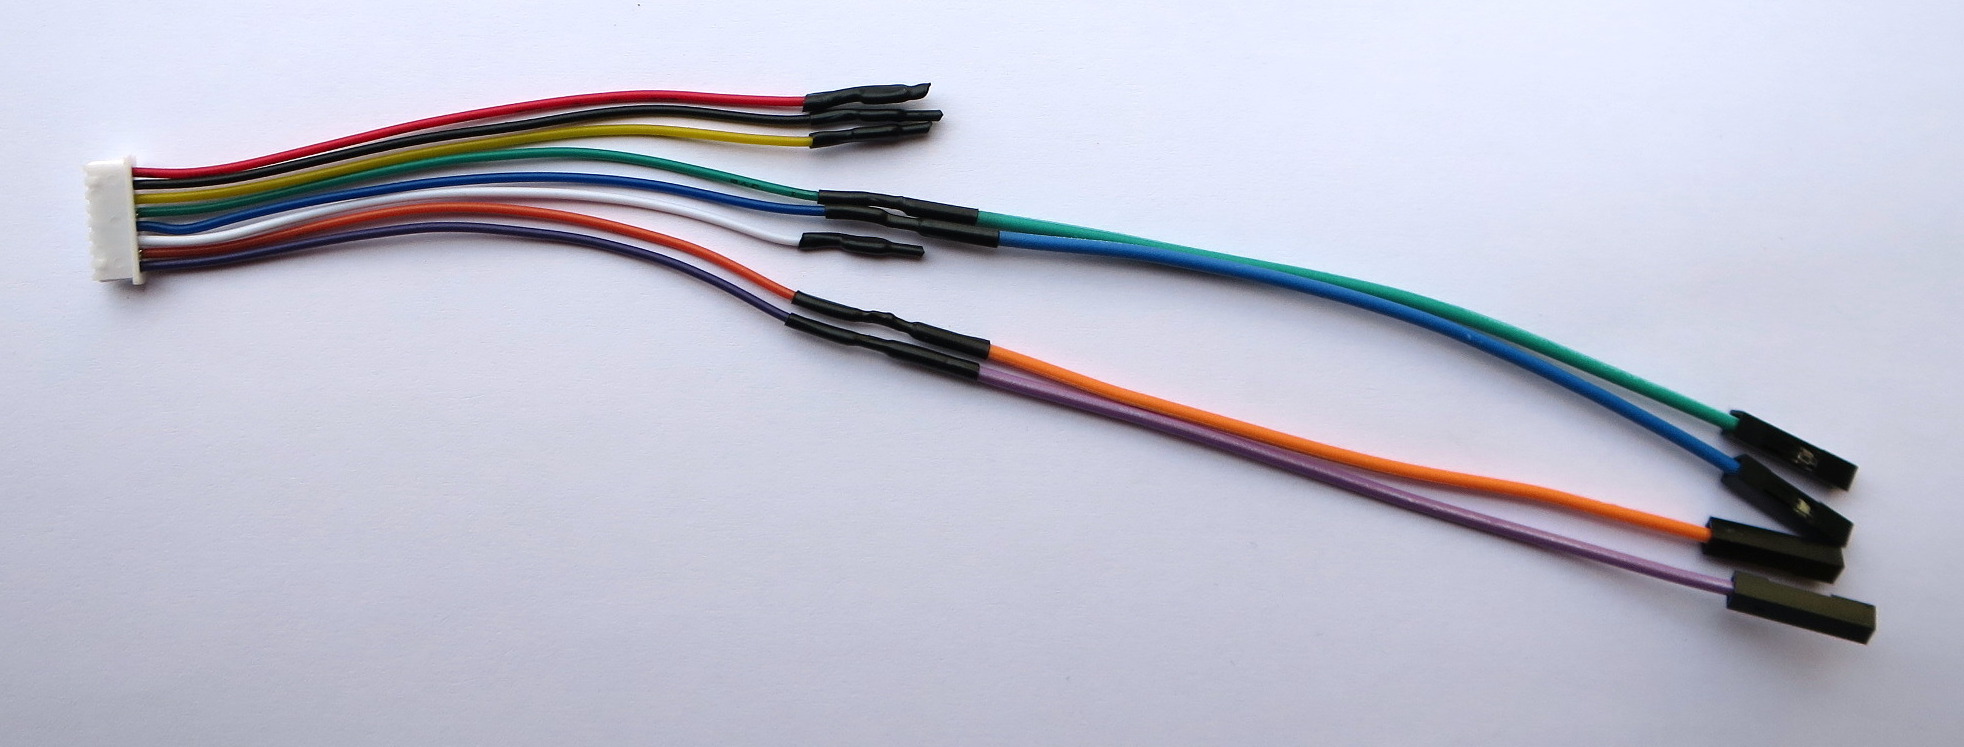 pms5003_cable.jpg